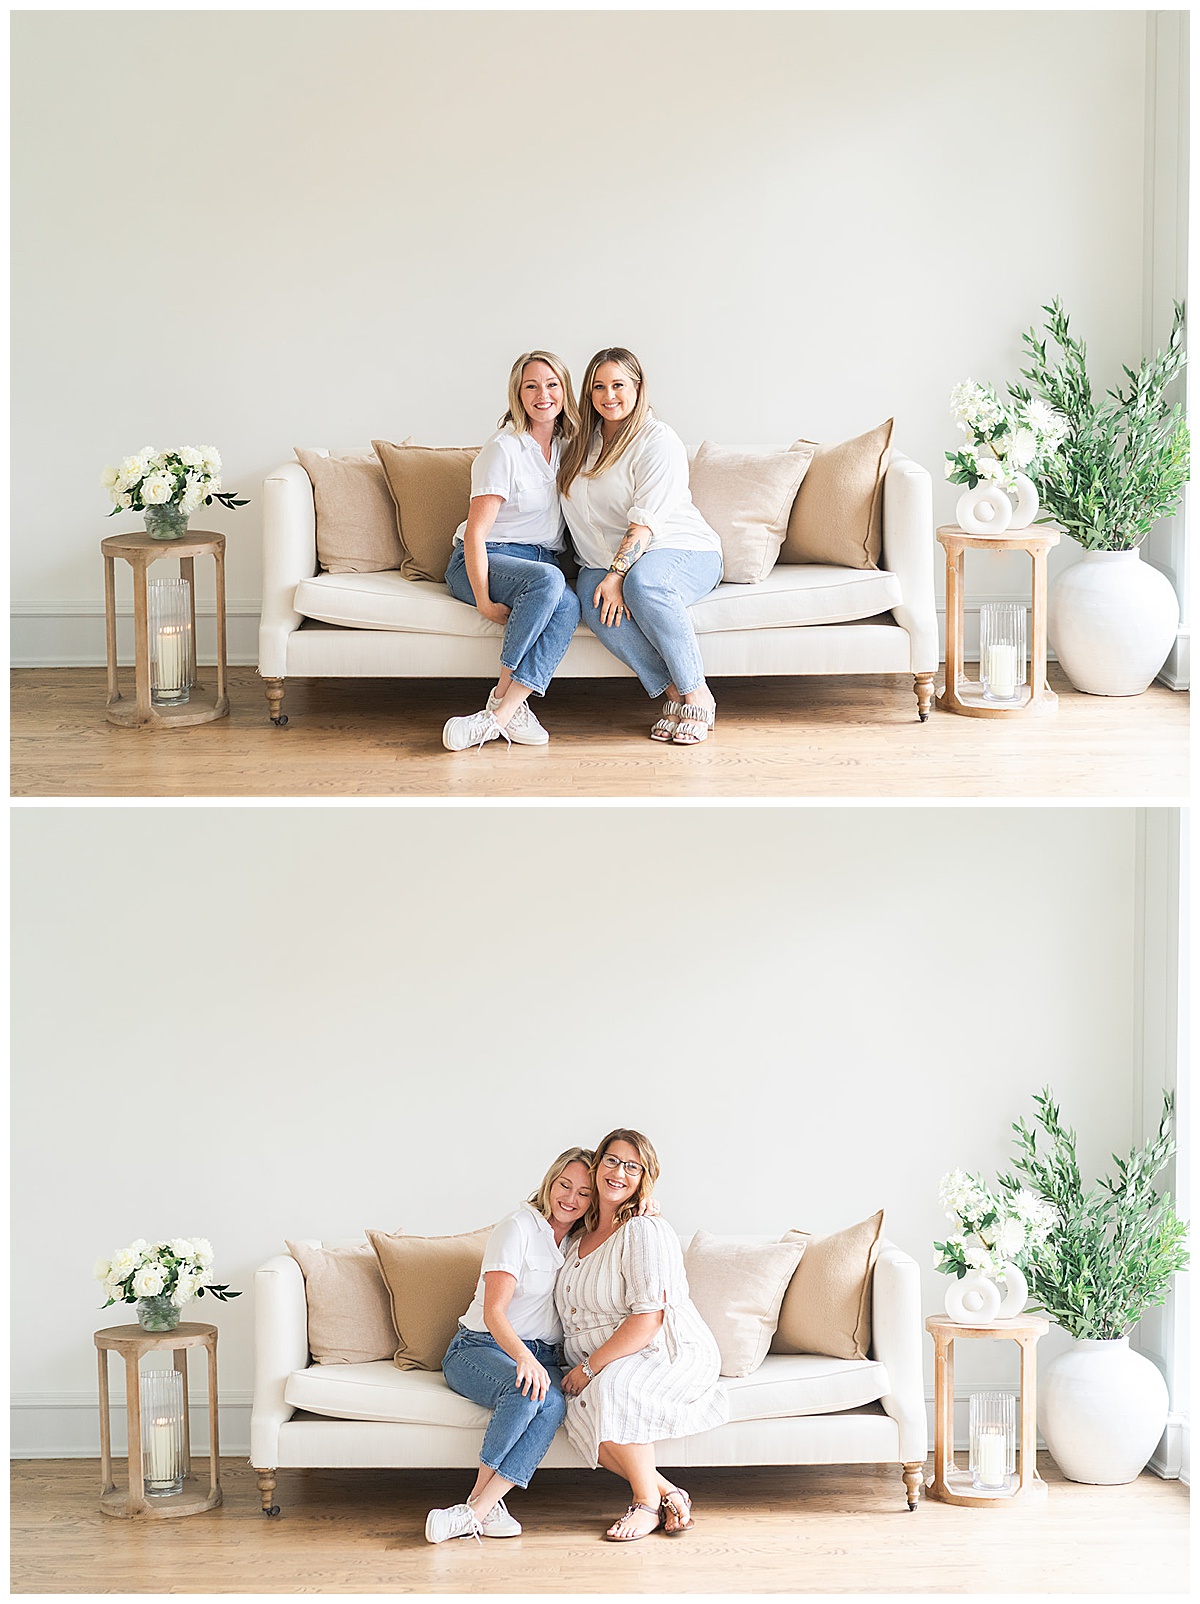 Two women sit together on a couch during a Branding Session for College Park Flowers